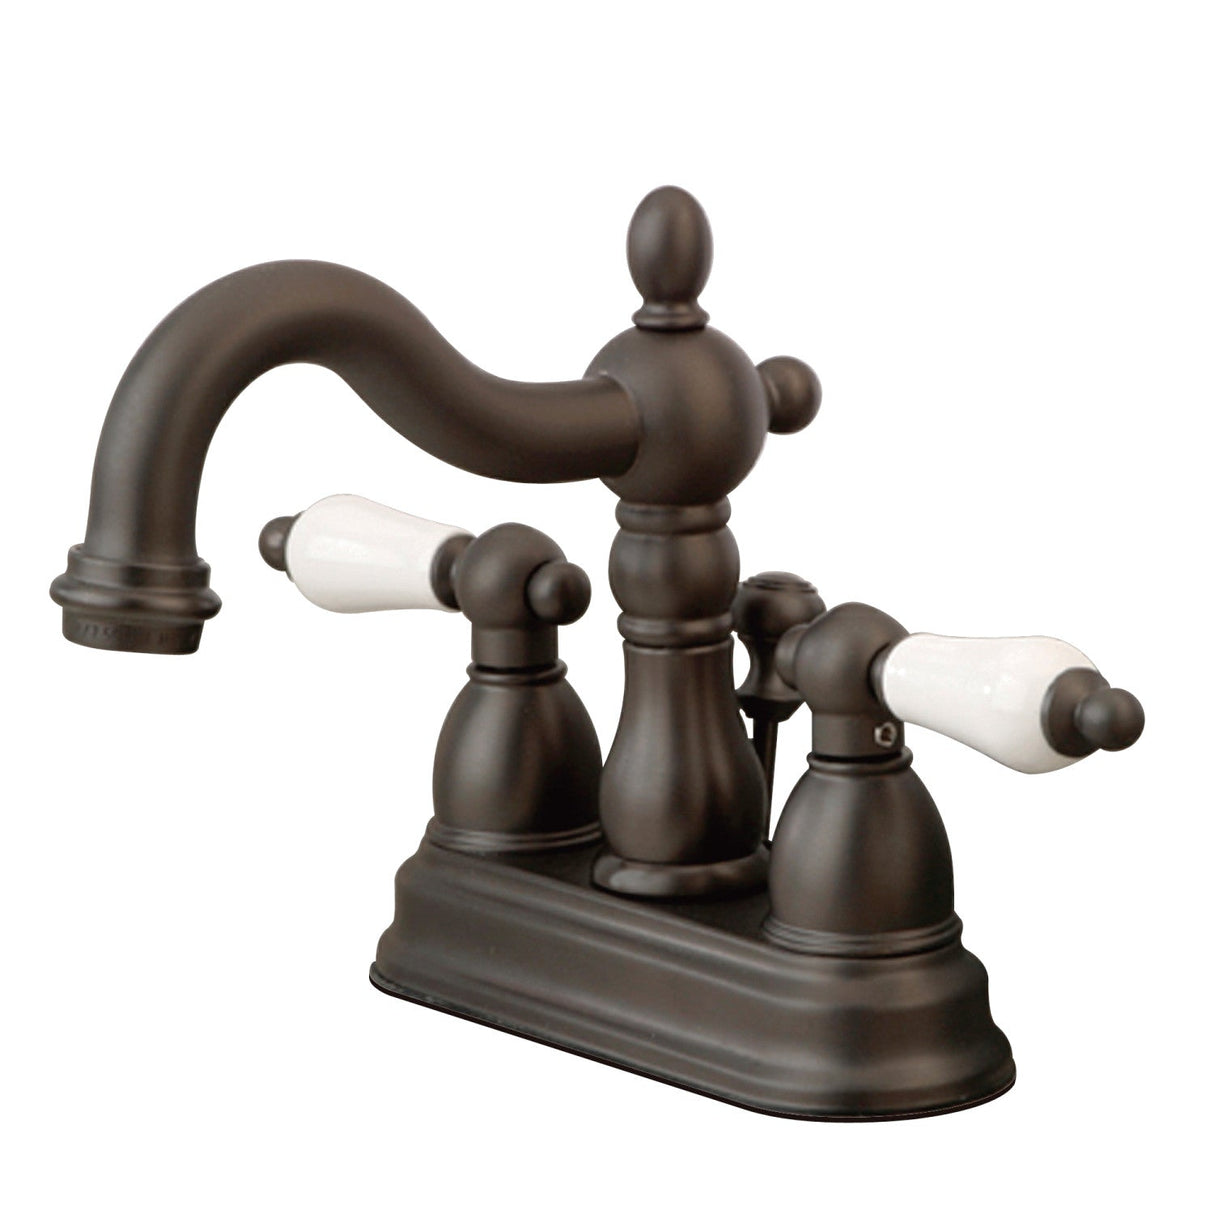 Heritage KS1605PL Two-Handle 3-Hole Deck Mount 4" Centerset Bathroom Faucet with Brass Pop-Up, Oil Rubbed Bronze